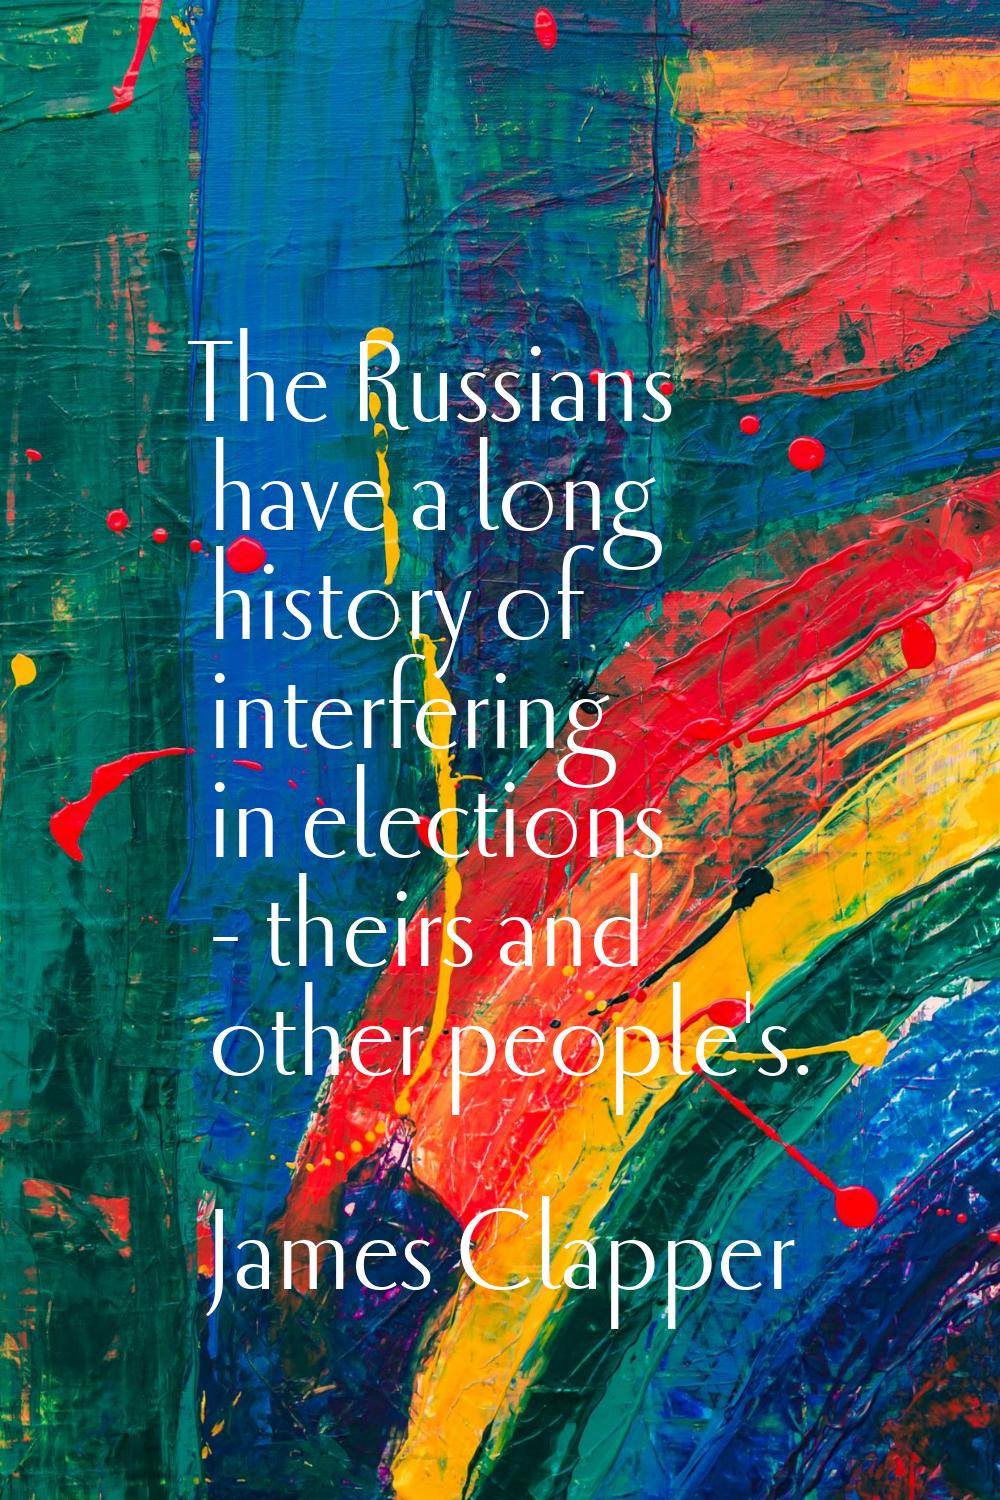 The Russians have a long history of interfering in elections - theirs and other people's.